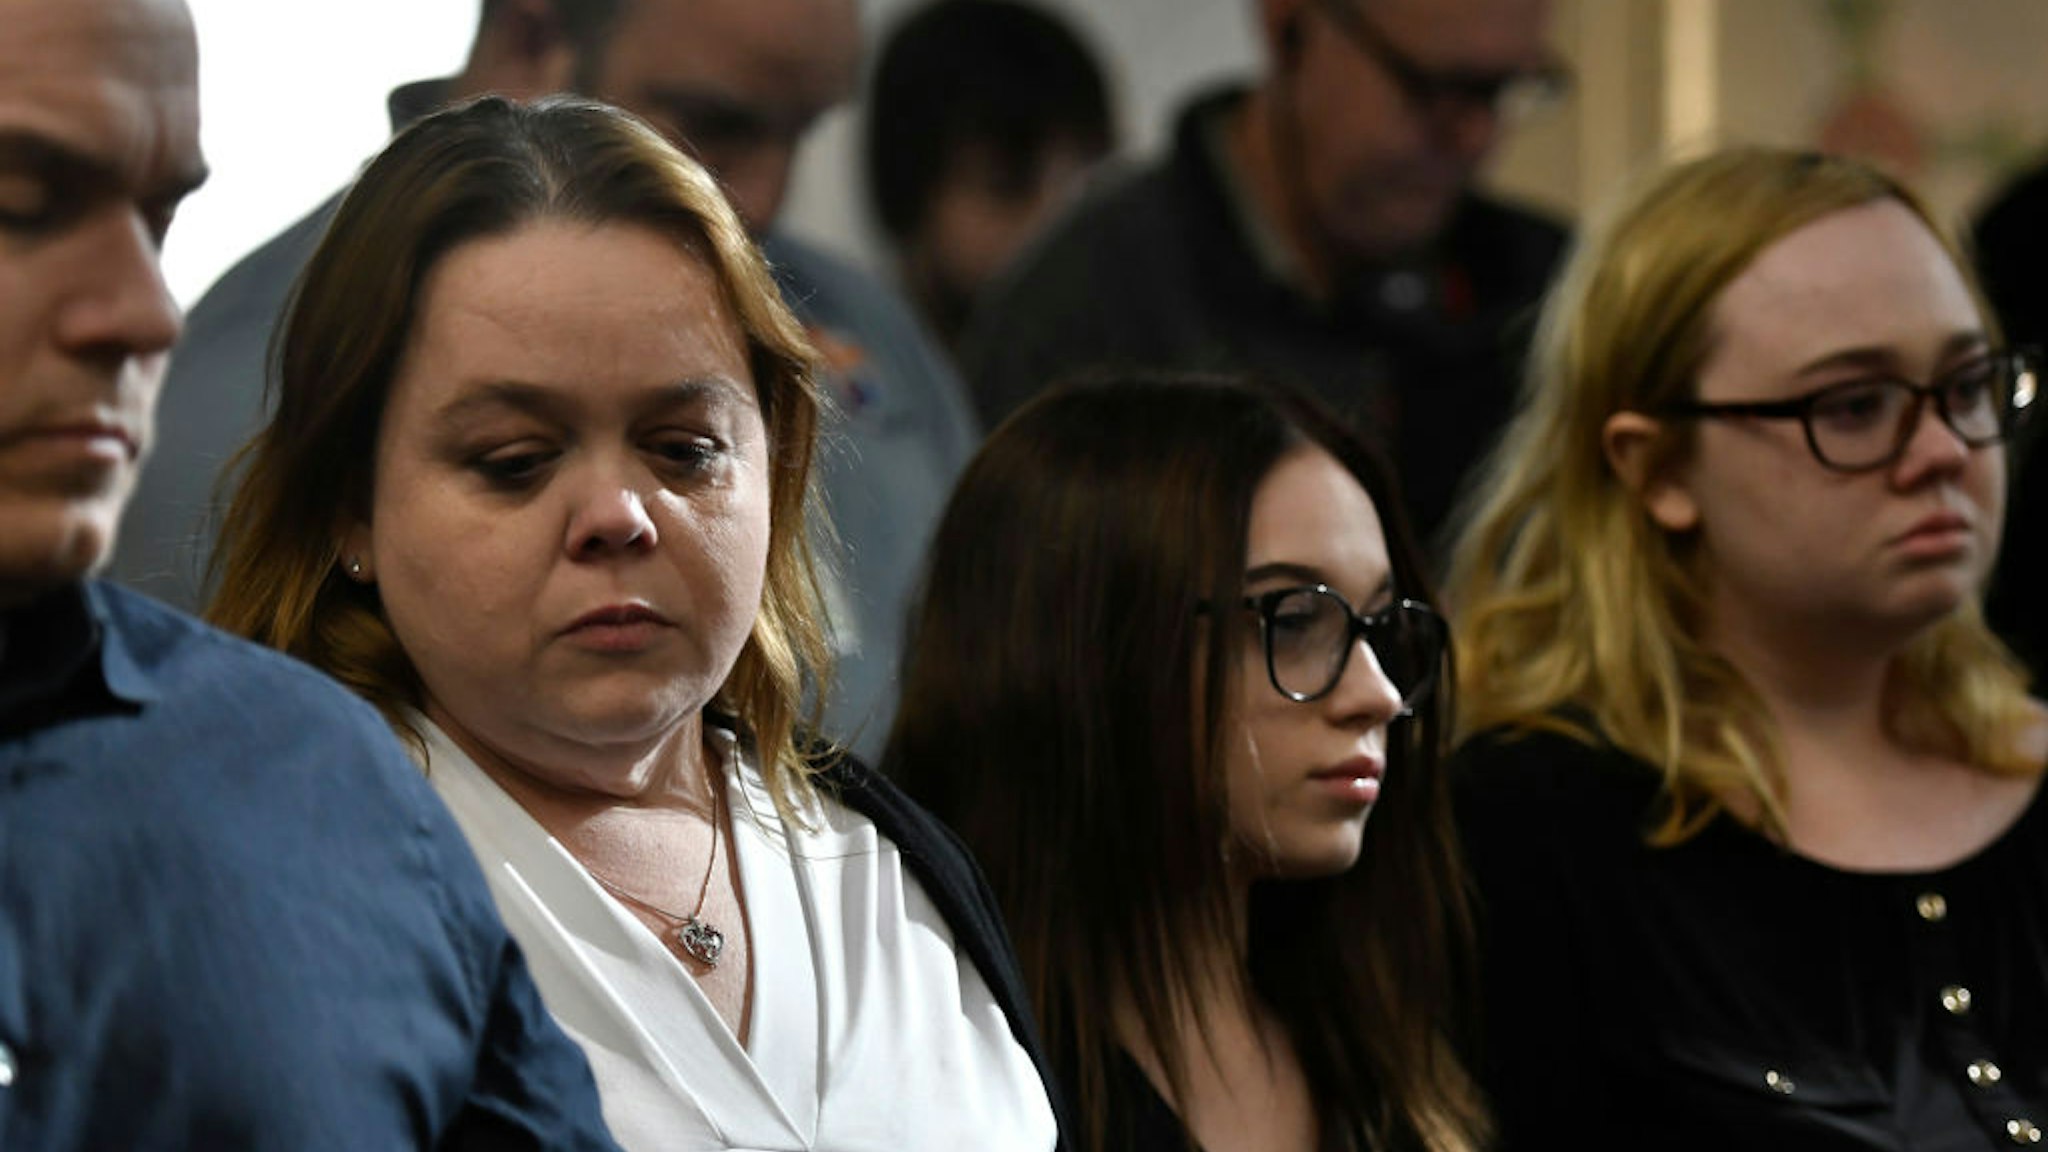 Kyle Rittenhouse's mother, Wendy Rittenhouse, second from left, and his sisters, McKenzie, and Faith nervously wait as the jury enters the room to give the verdicts in Kyle Rittenhouse's trial at the Kenosha County Courthouse on November 19, 2021 in Kenosha, Wisconsin.